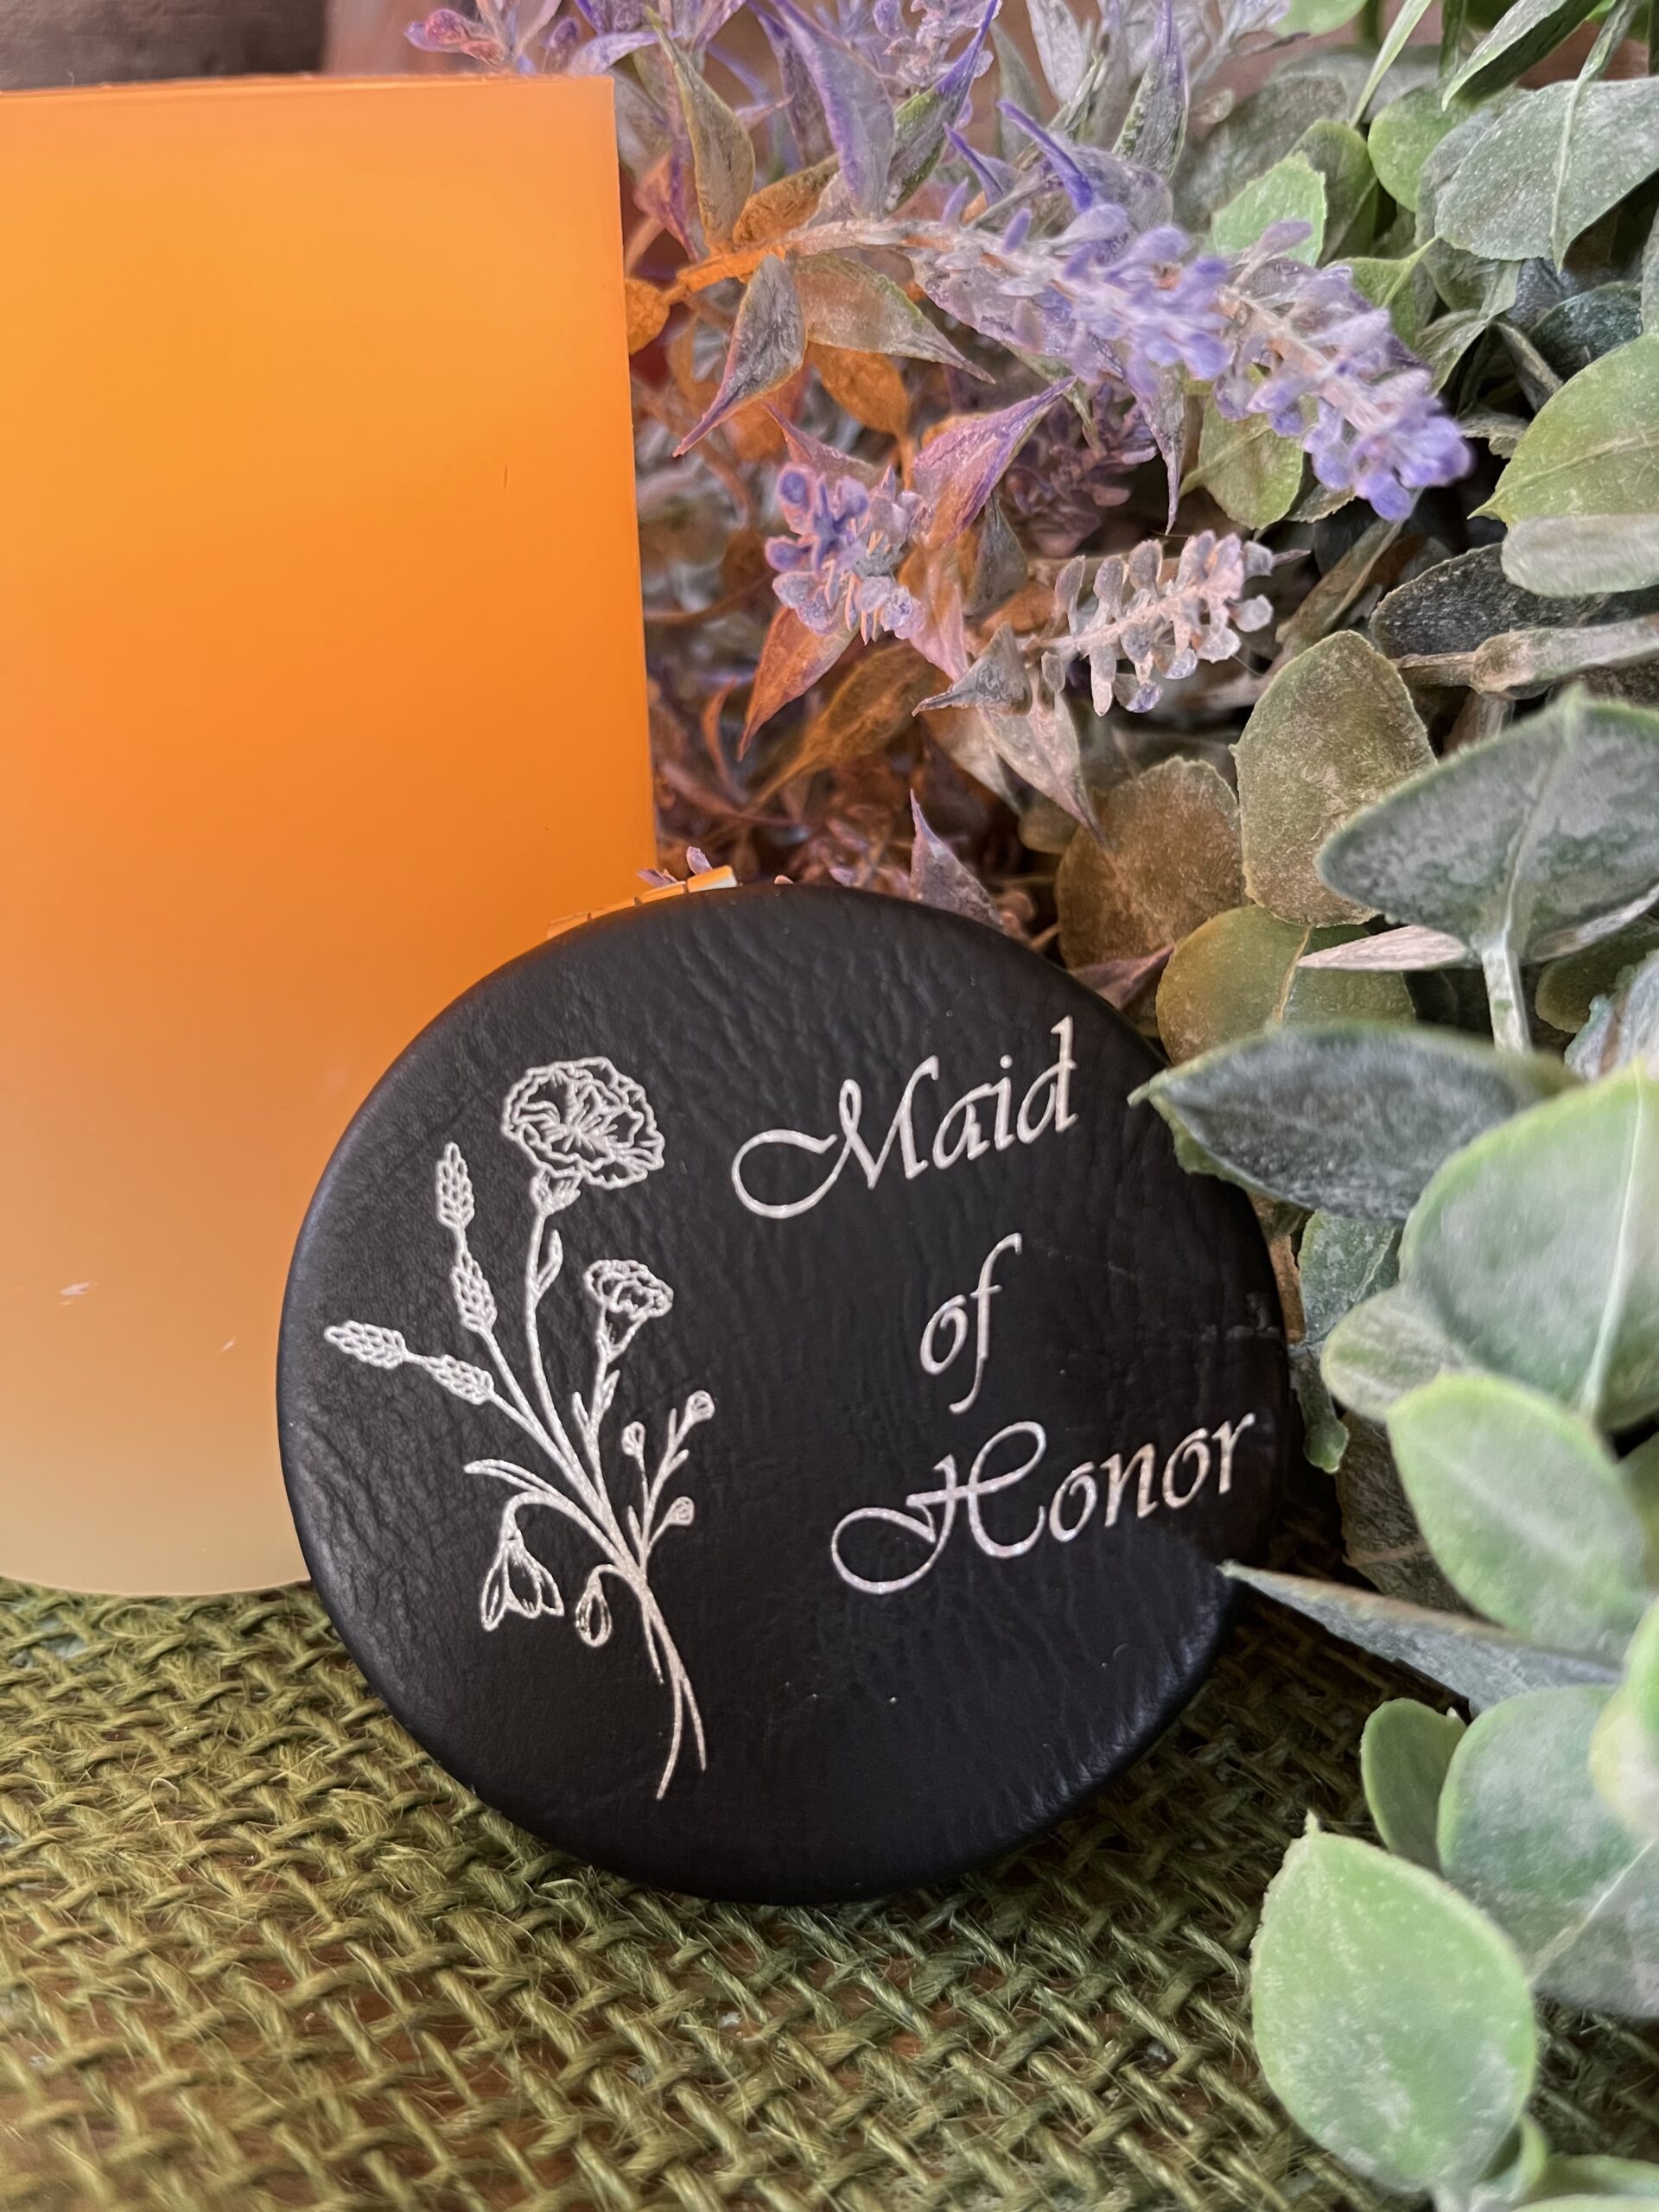 Engraved compact mirror with personalization